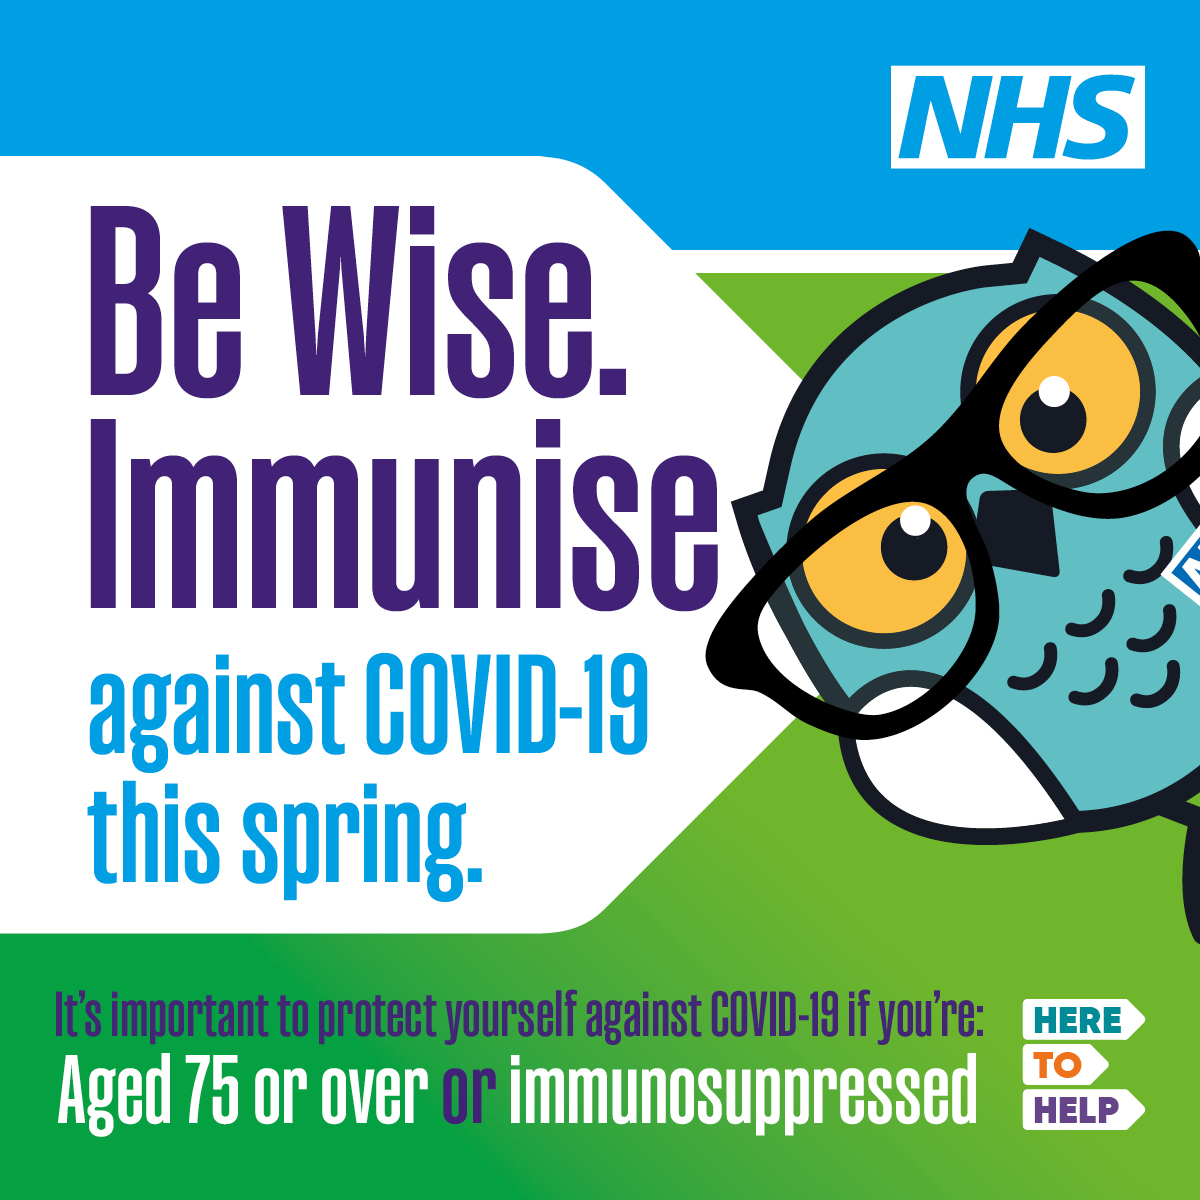 This spring those most vulnerable and at greatest risk from COVID-19 will need extra protection. Make sure you get your vaccination as soon as possible to get fully protected. #BeWiseImmunise